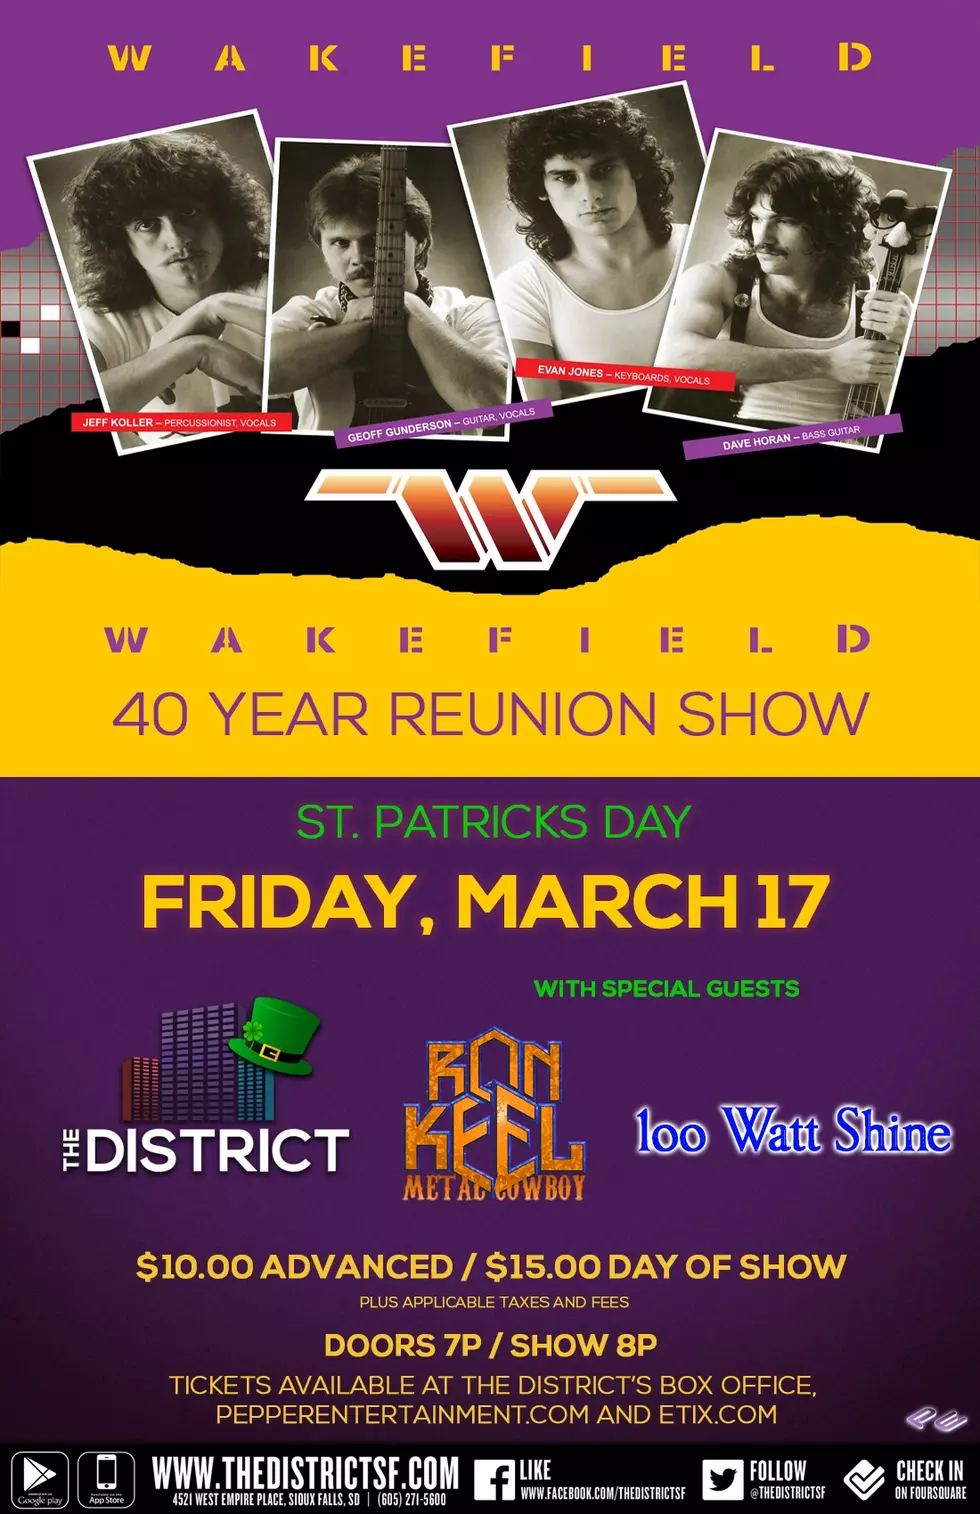 Wakefield’s 40 Year Reunion Show Will Be One to Remember